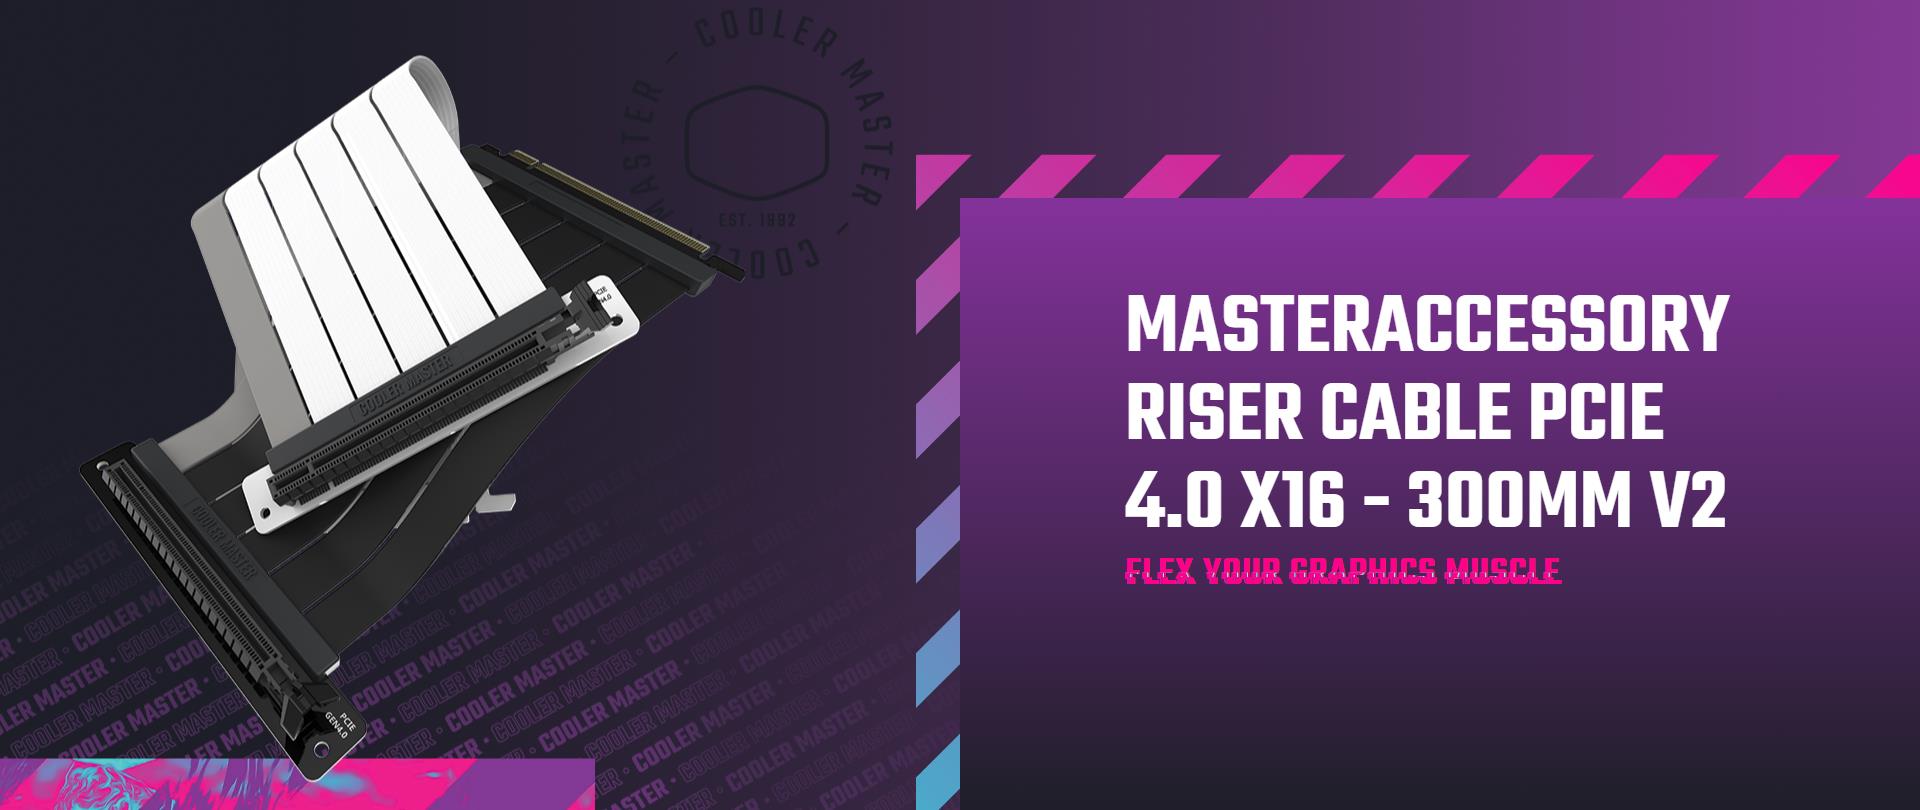 A large marketing image providing additional information about the product Cooler Master PCIe 4.0 X16 V2 Riser Cable - 300mm - Additional alt info not provided